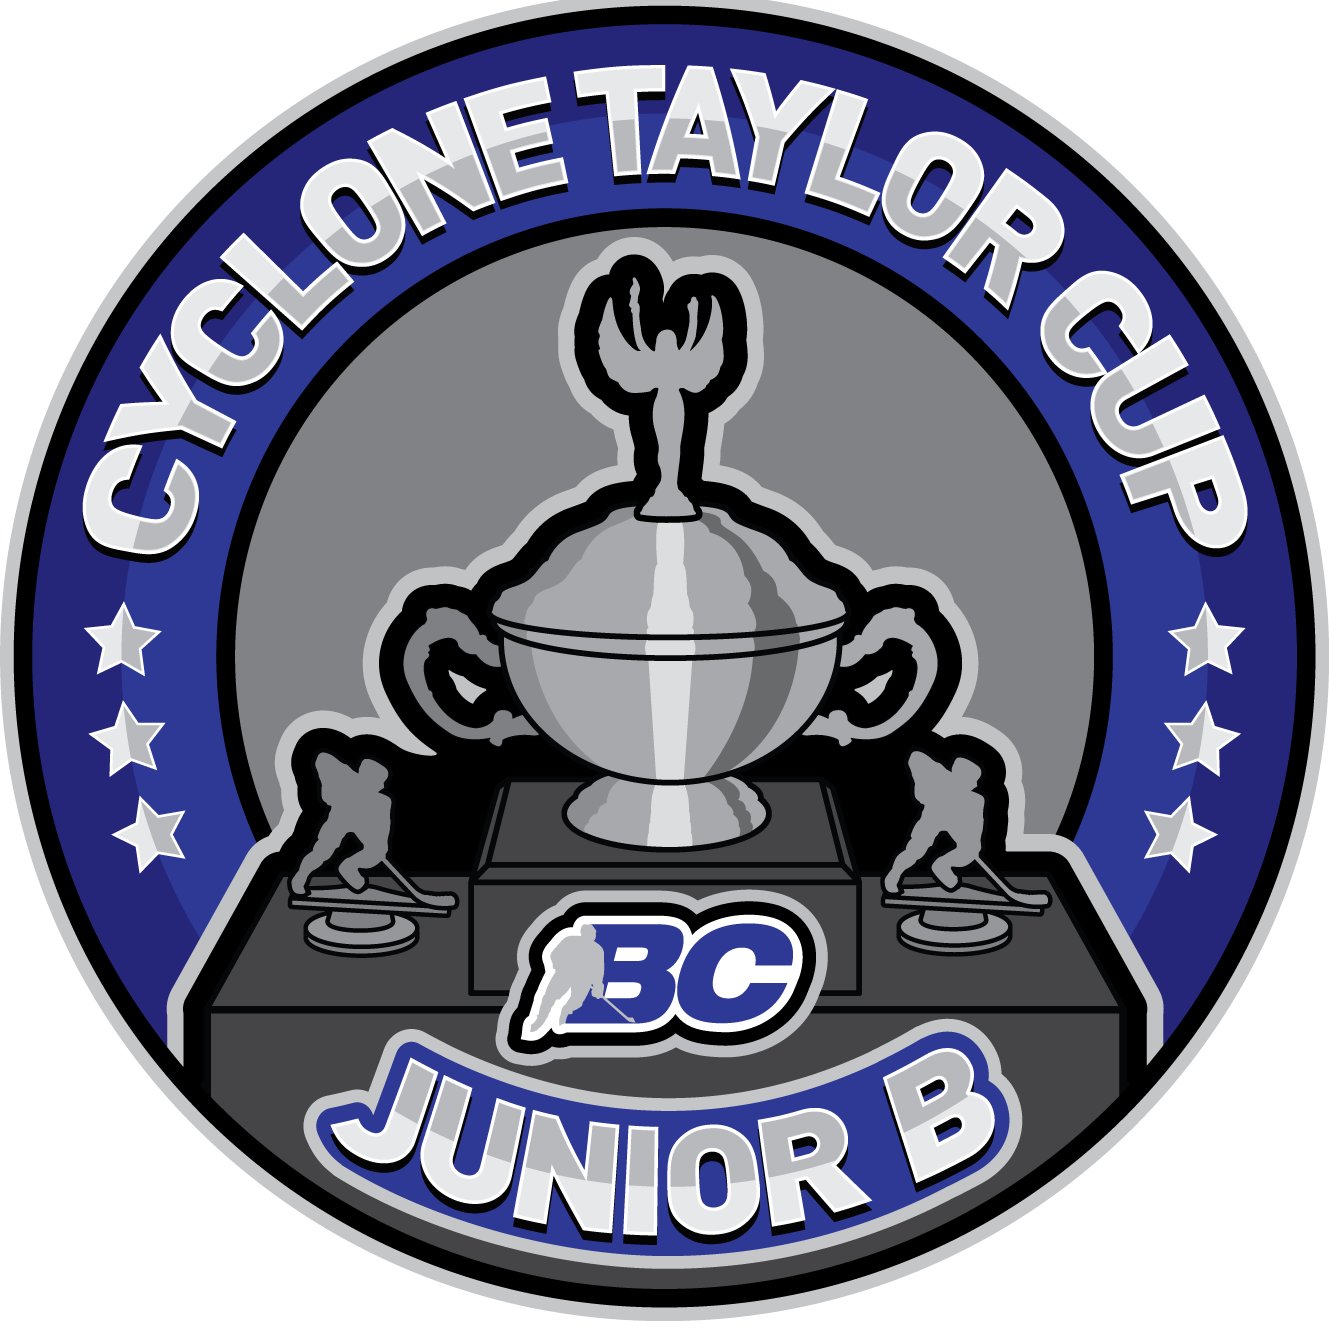 Sharing BC Junior B hockey news. The 2023 Cyclone Taylor Cup is being hosted by the Grizzlies and the incredible City of Revelstoke